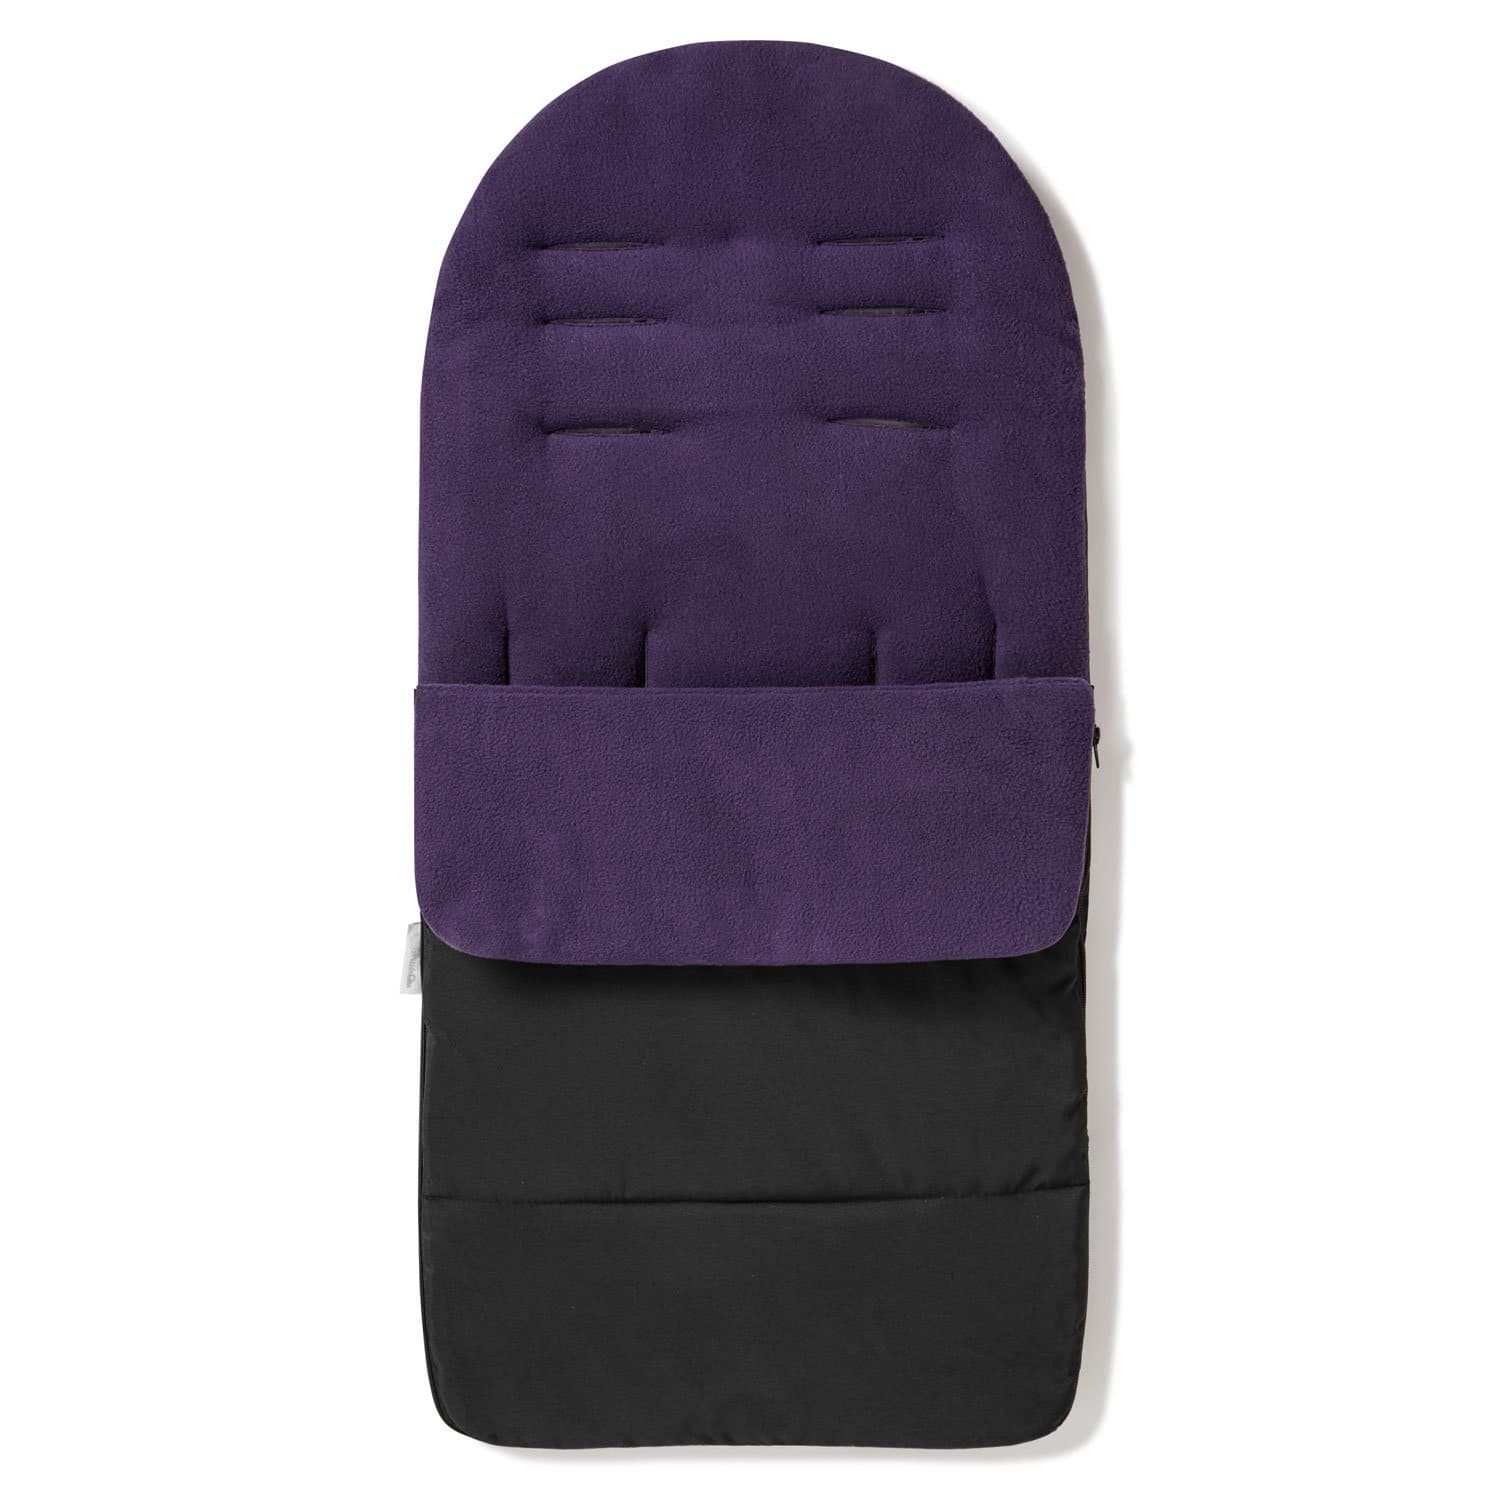 Premium Footmuff / Cosy Toes Compatible with Baby Jogger - Plum Purple / Fits All Models | For Your Little One